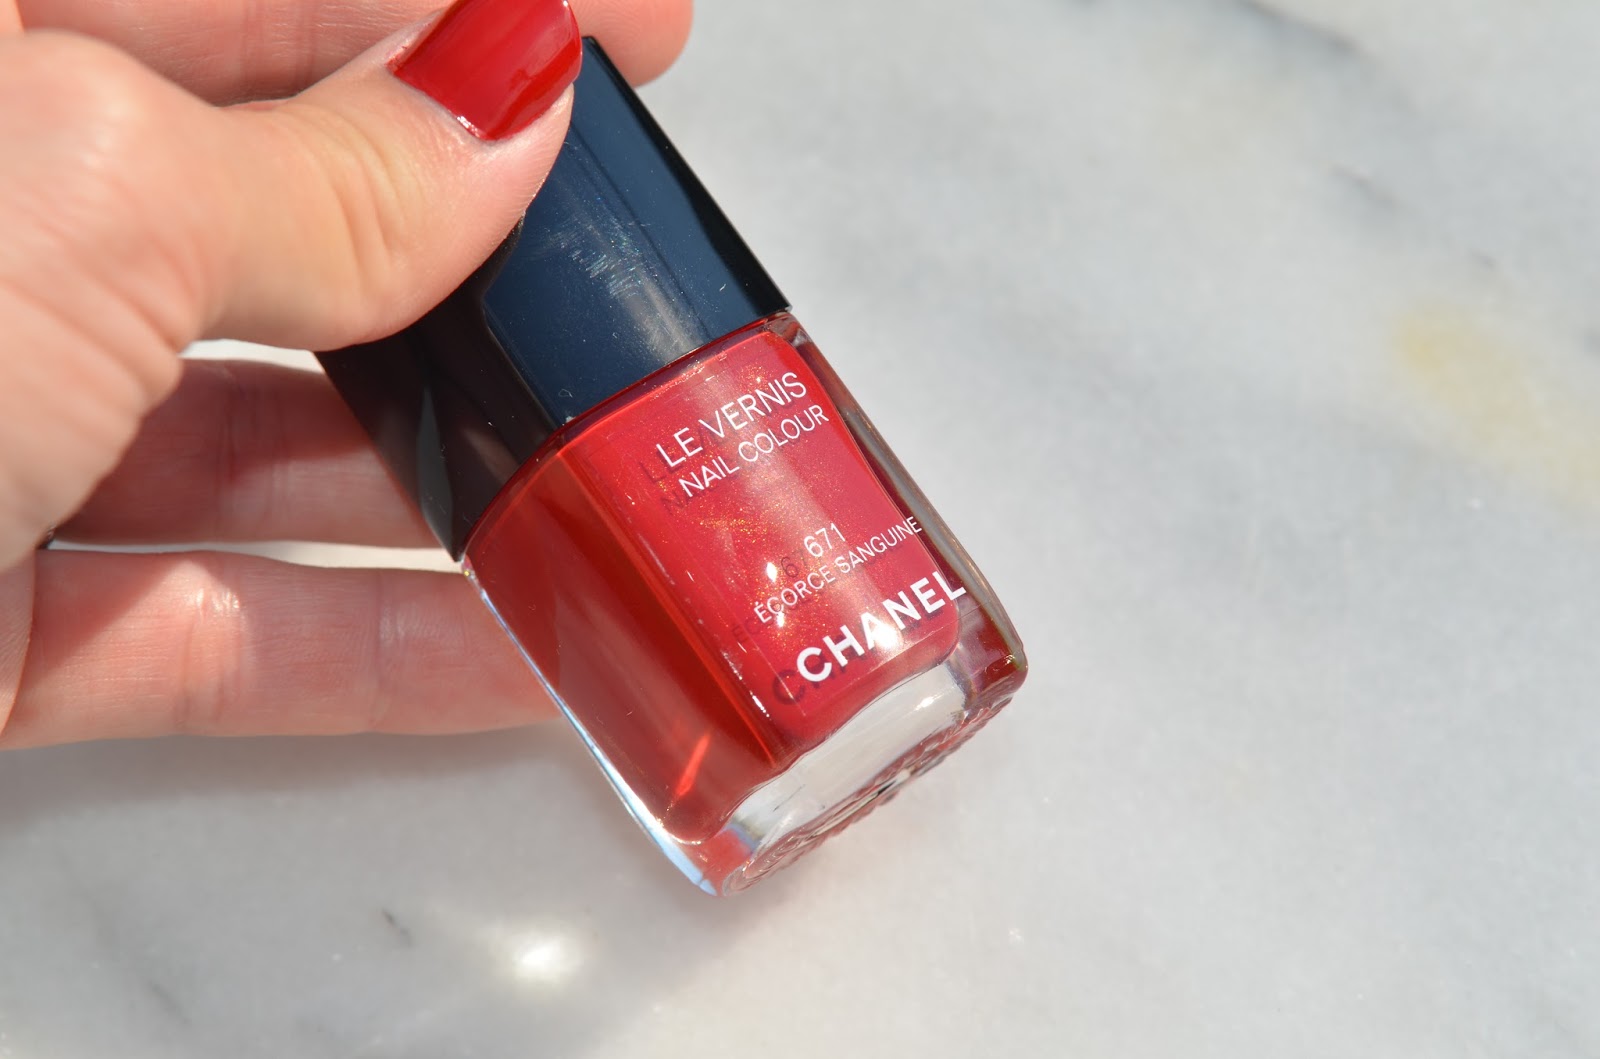 Chanel Fall 2015 Nail Polish: Ecorce Sanguine, Vert Obscur & Chataigne By Georgia Grace